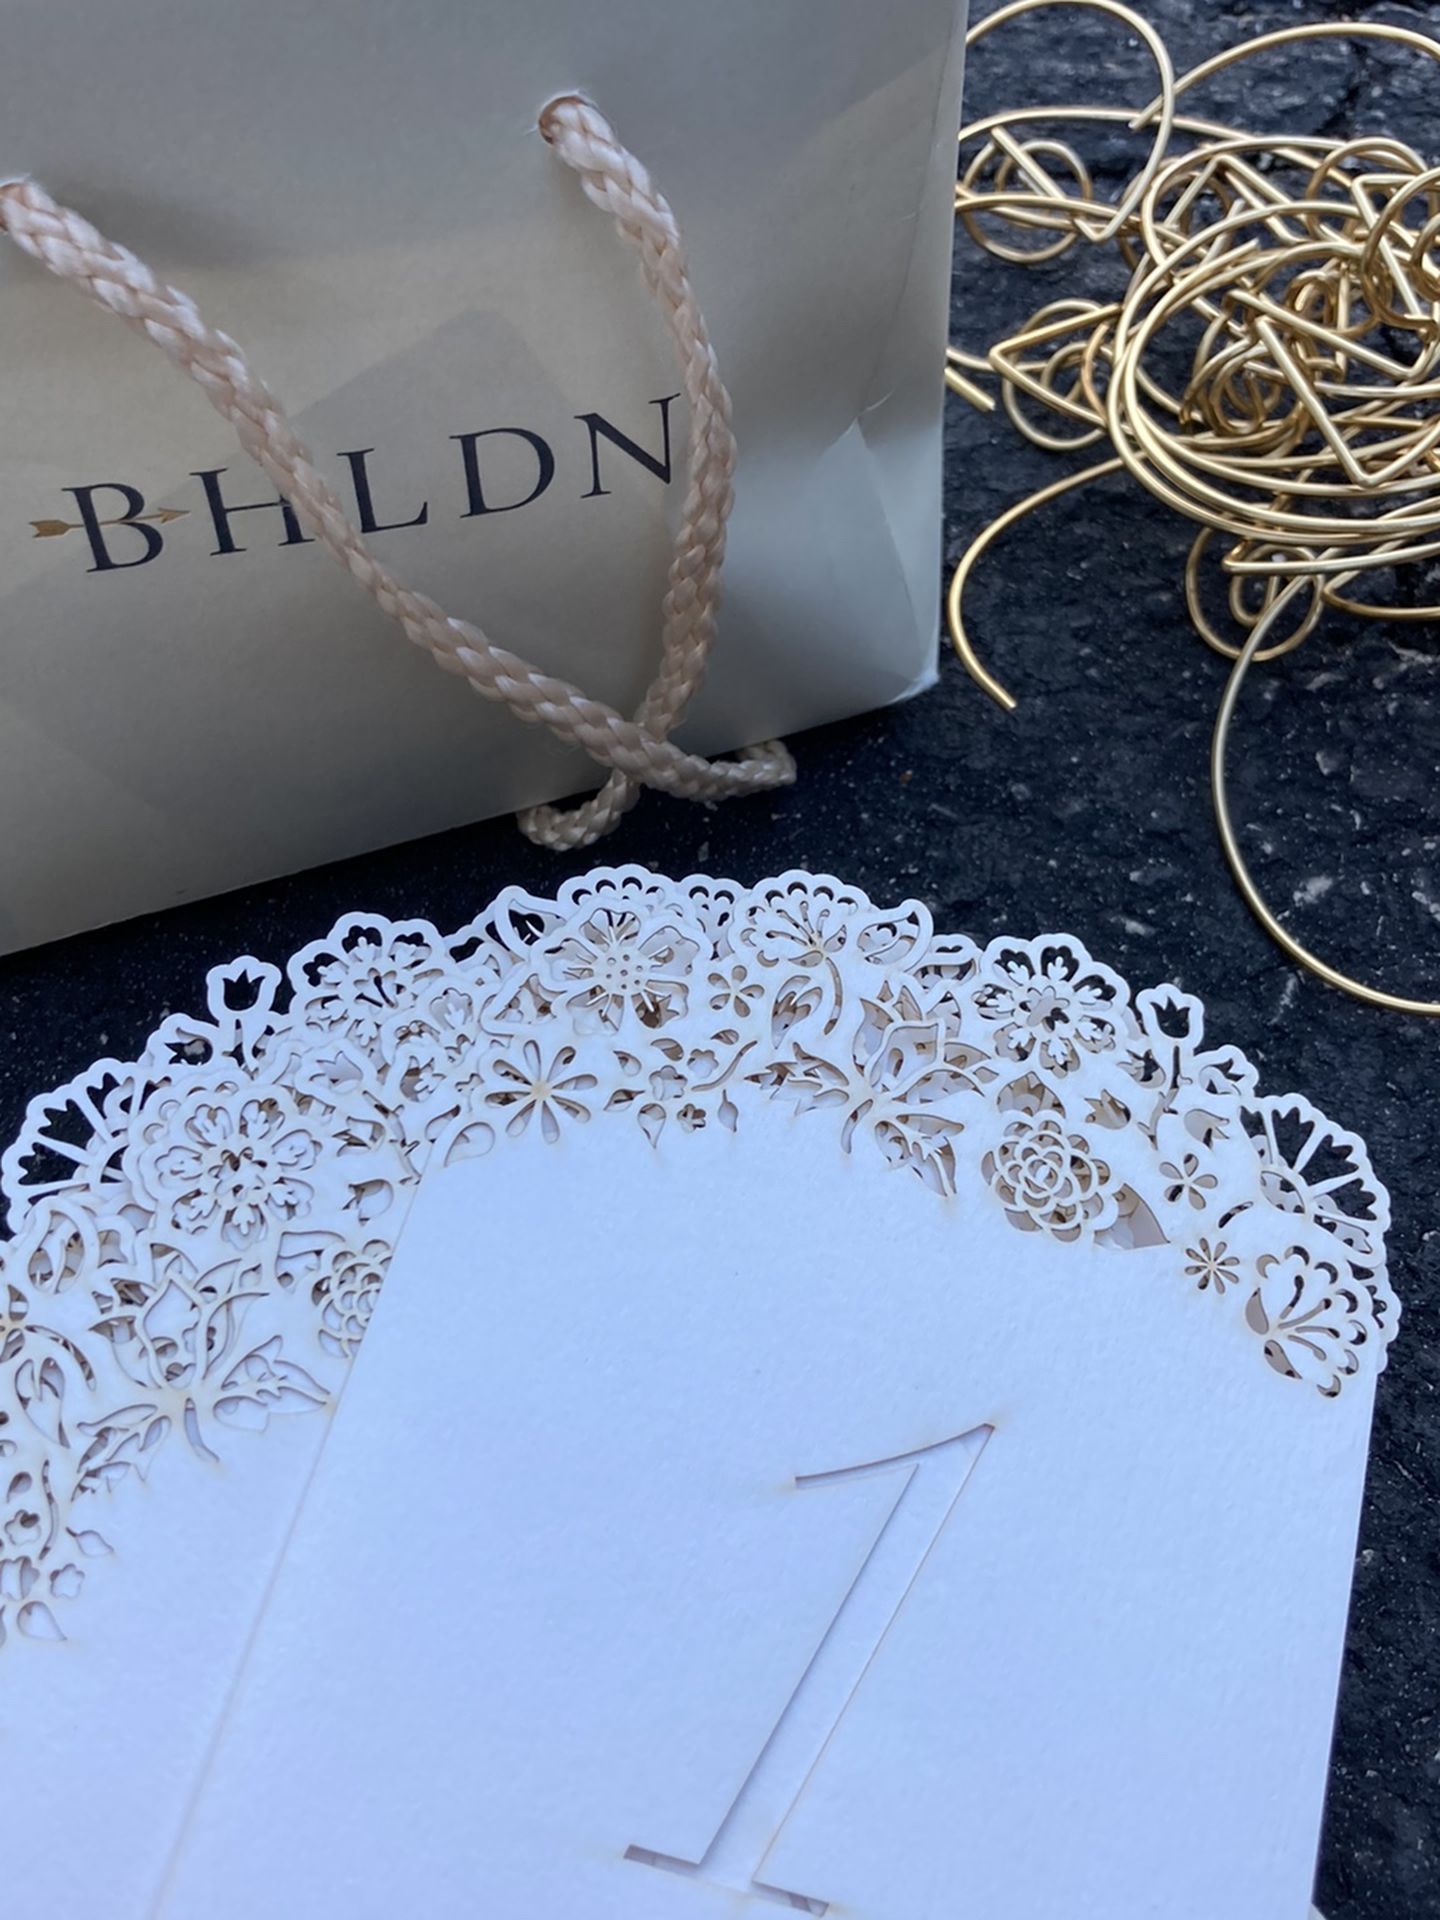 BHLDN number cards and holders 